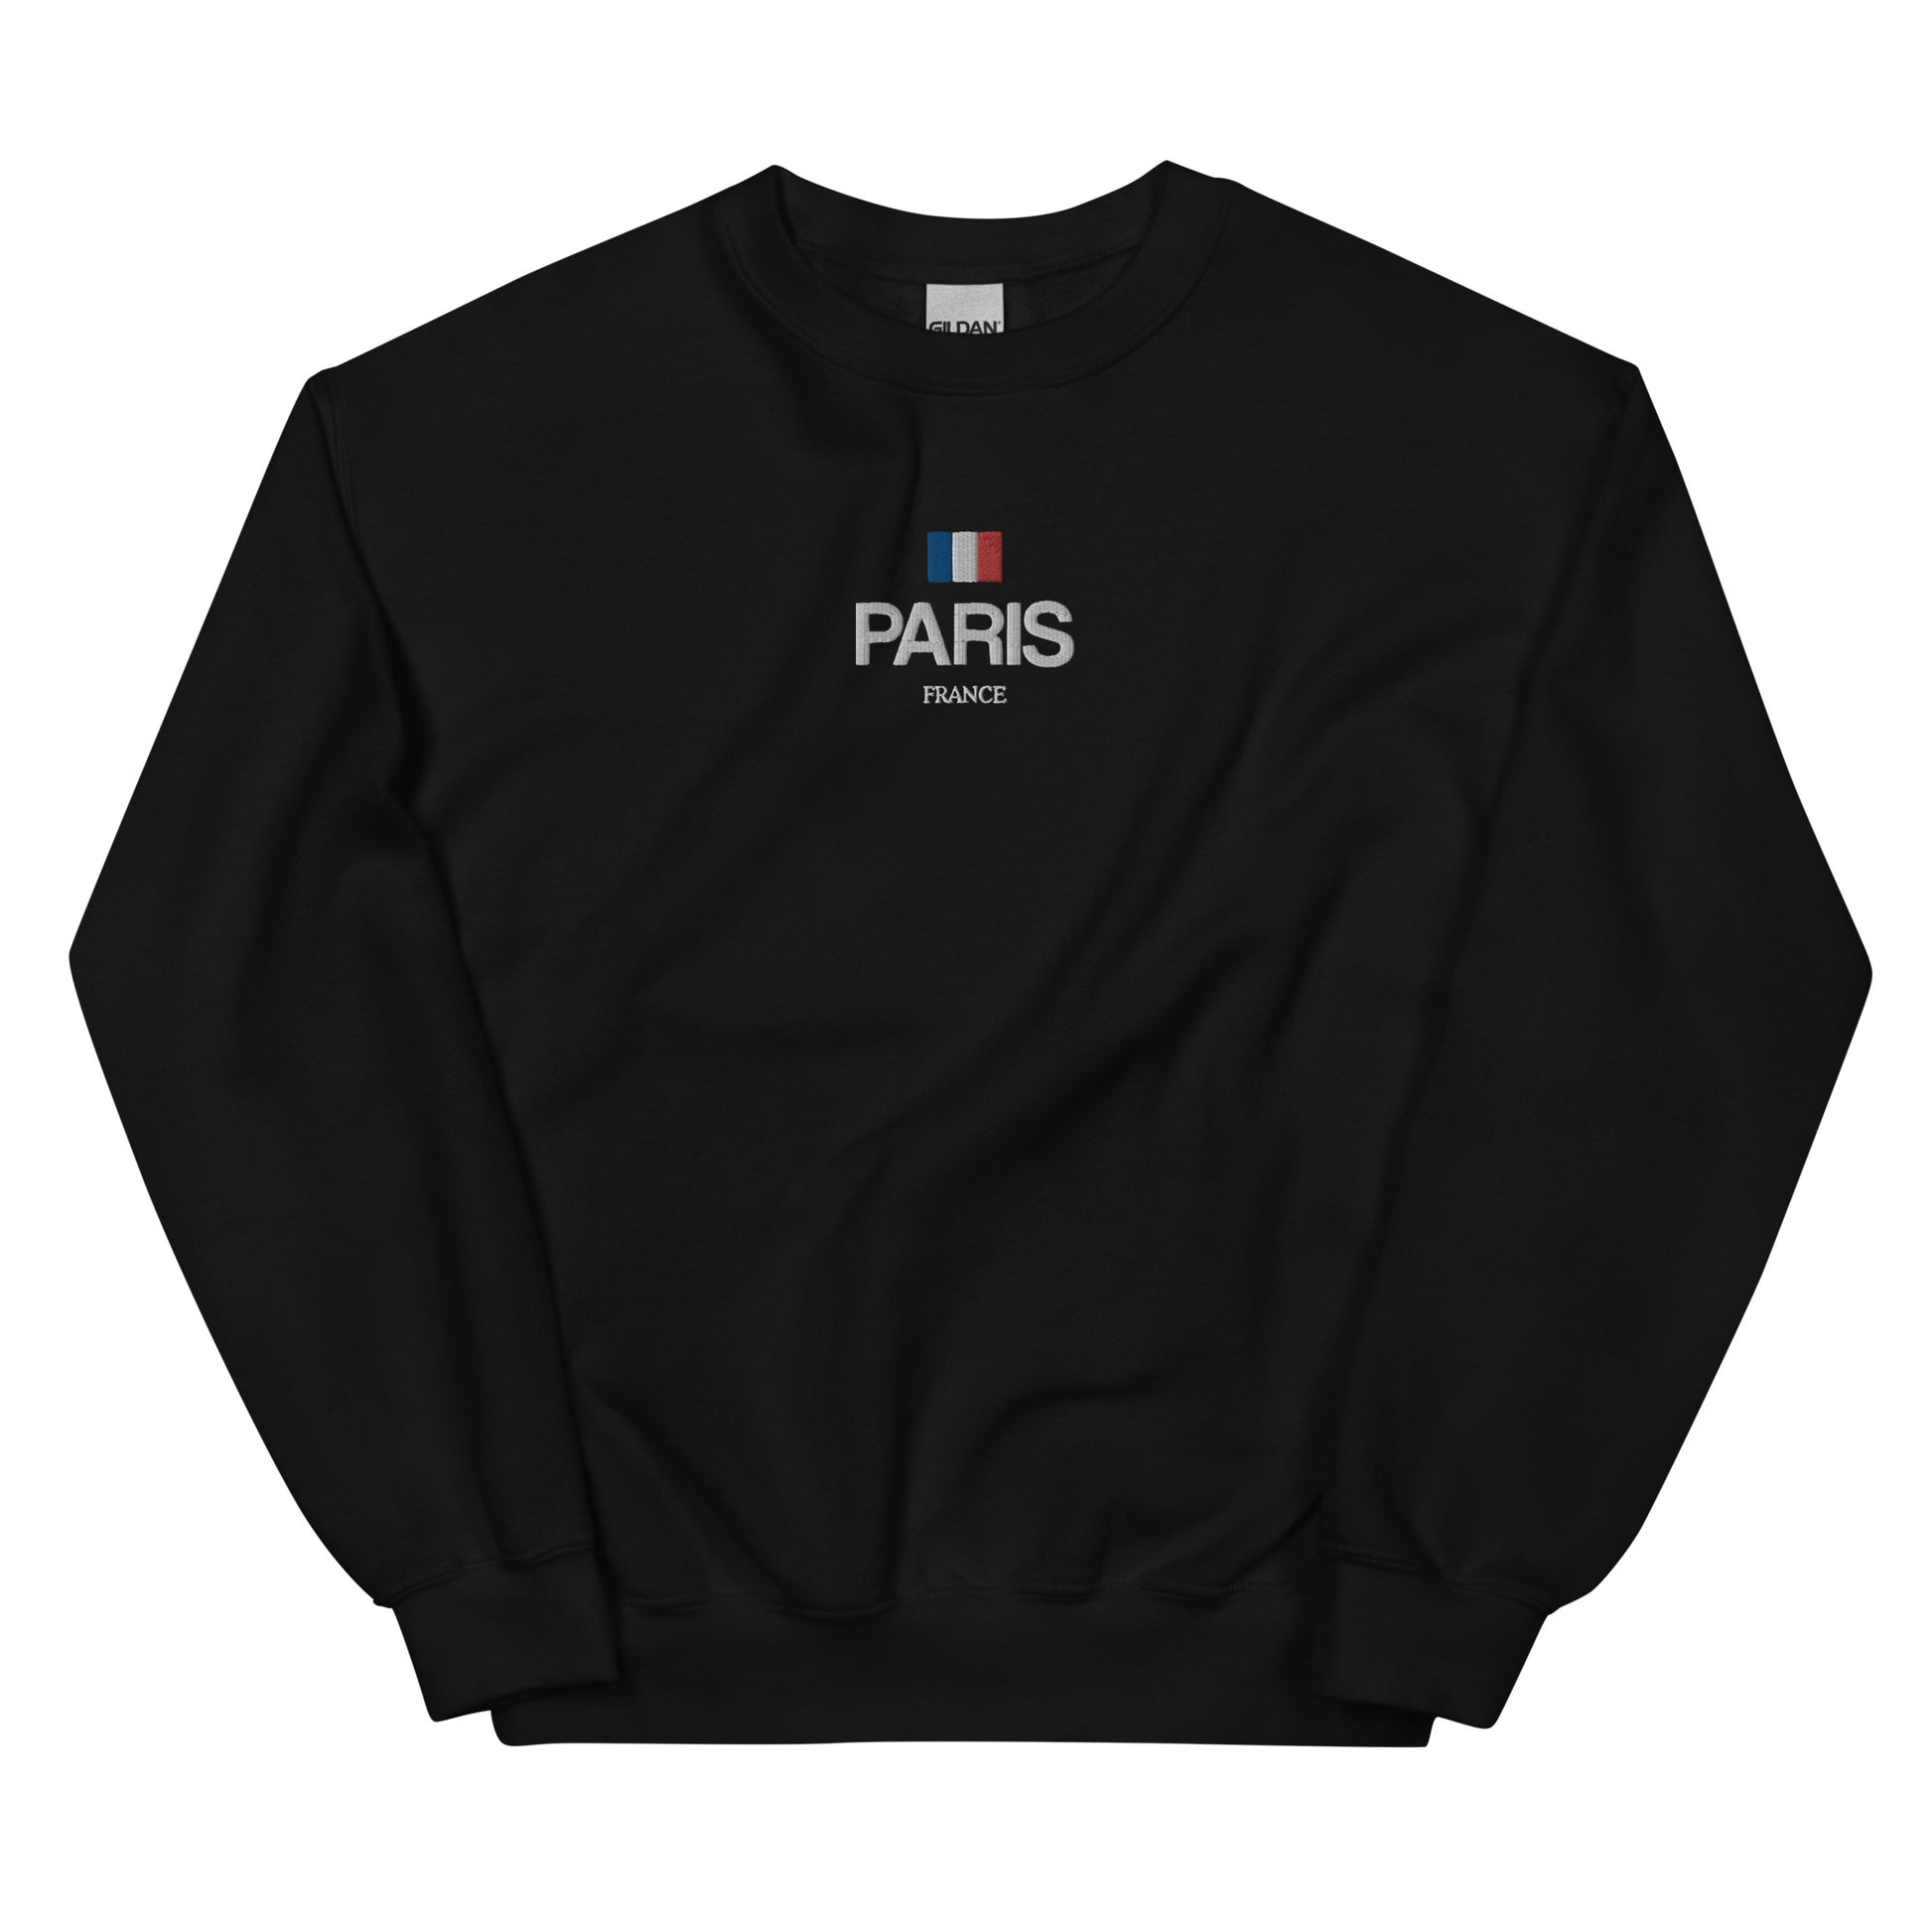 Paris France Embroidered Sweatshirt, Vintage City Travel Crewneck sweater Graphic Pullover Men Women Aesthetic Top Gifts Starcove Fashion